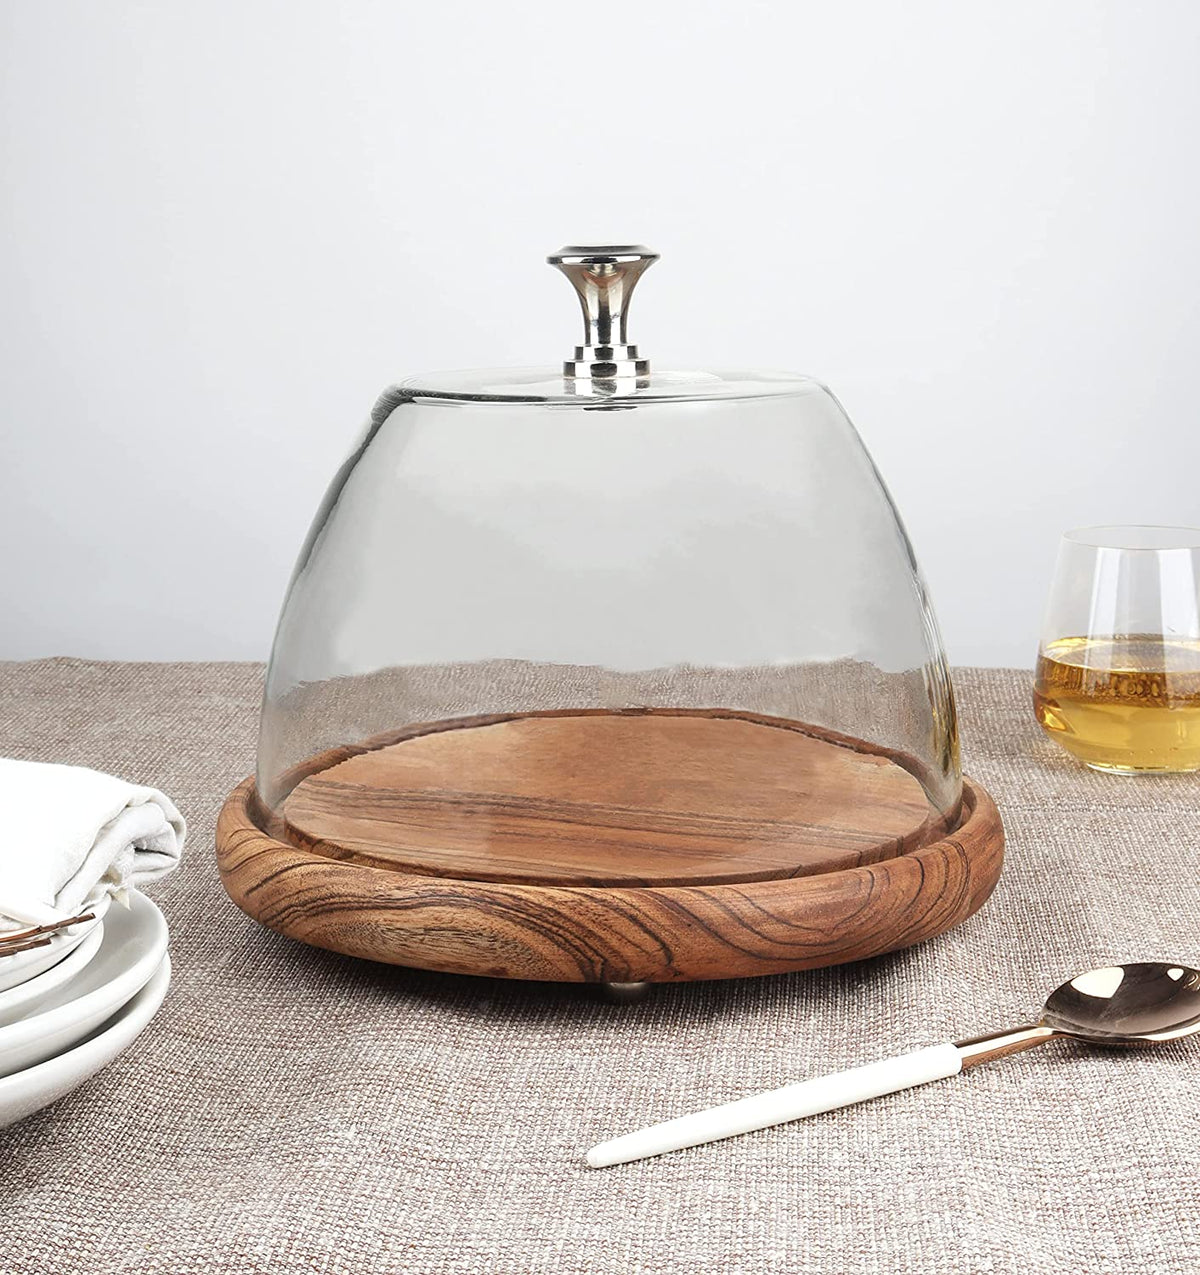 Rustic Cake Plate with Glass Cloche - 8.5 inch